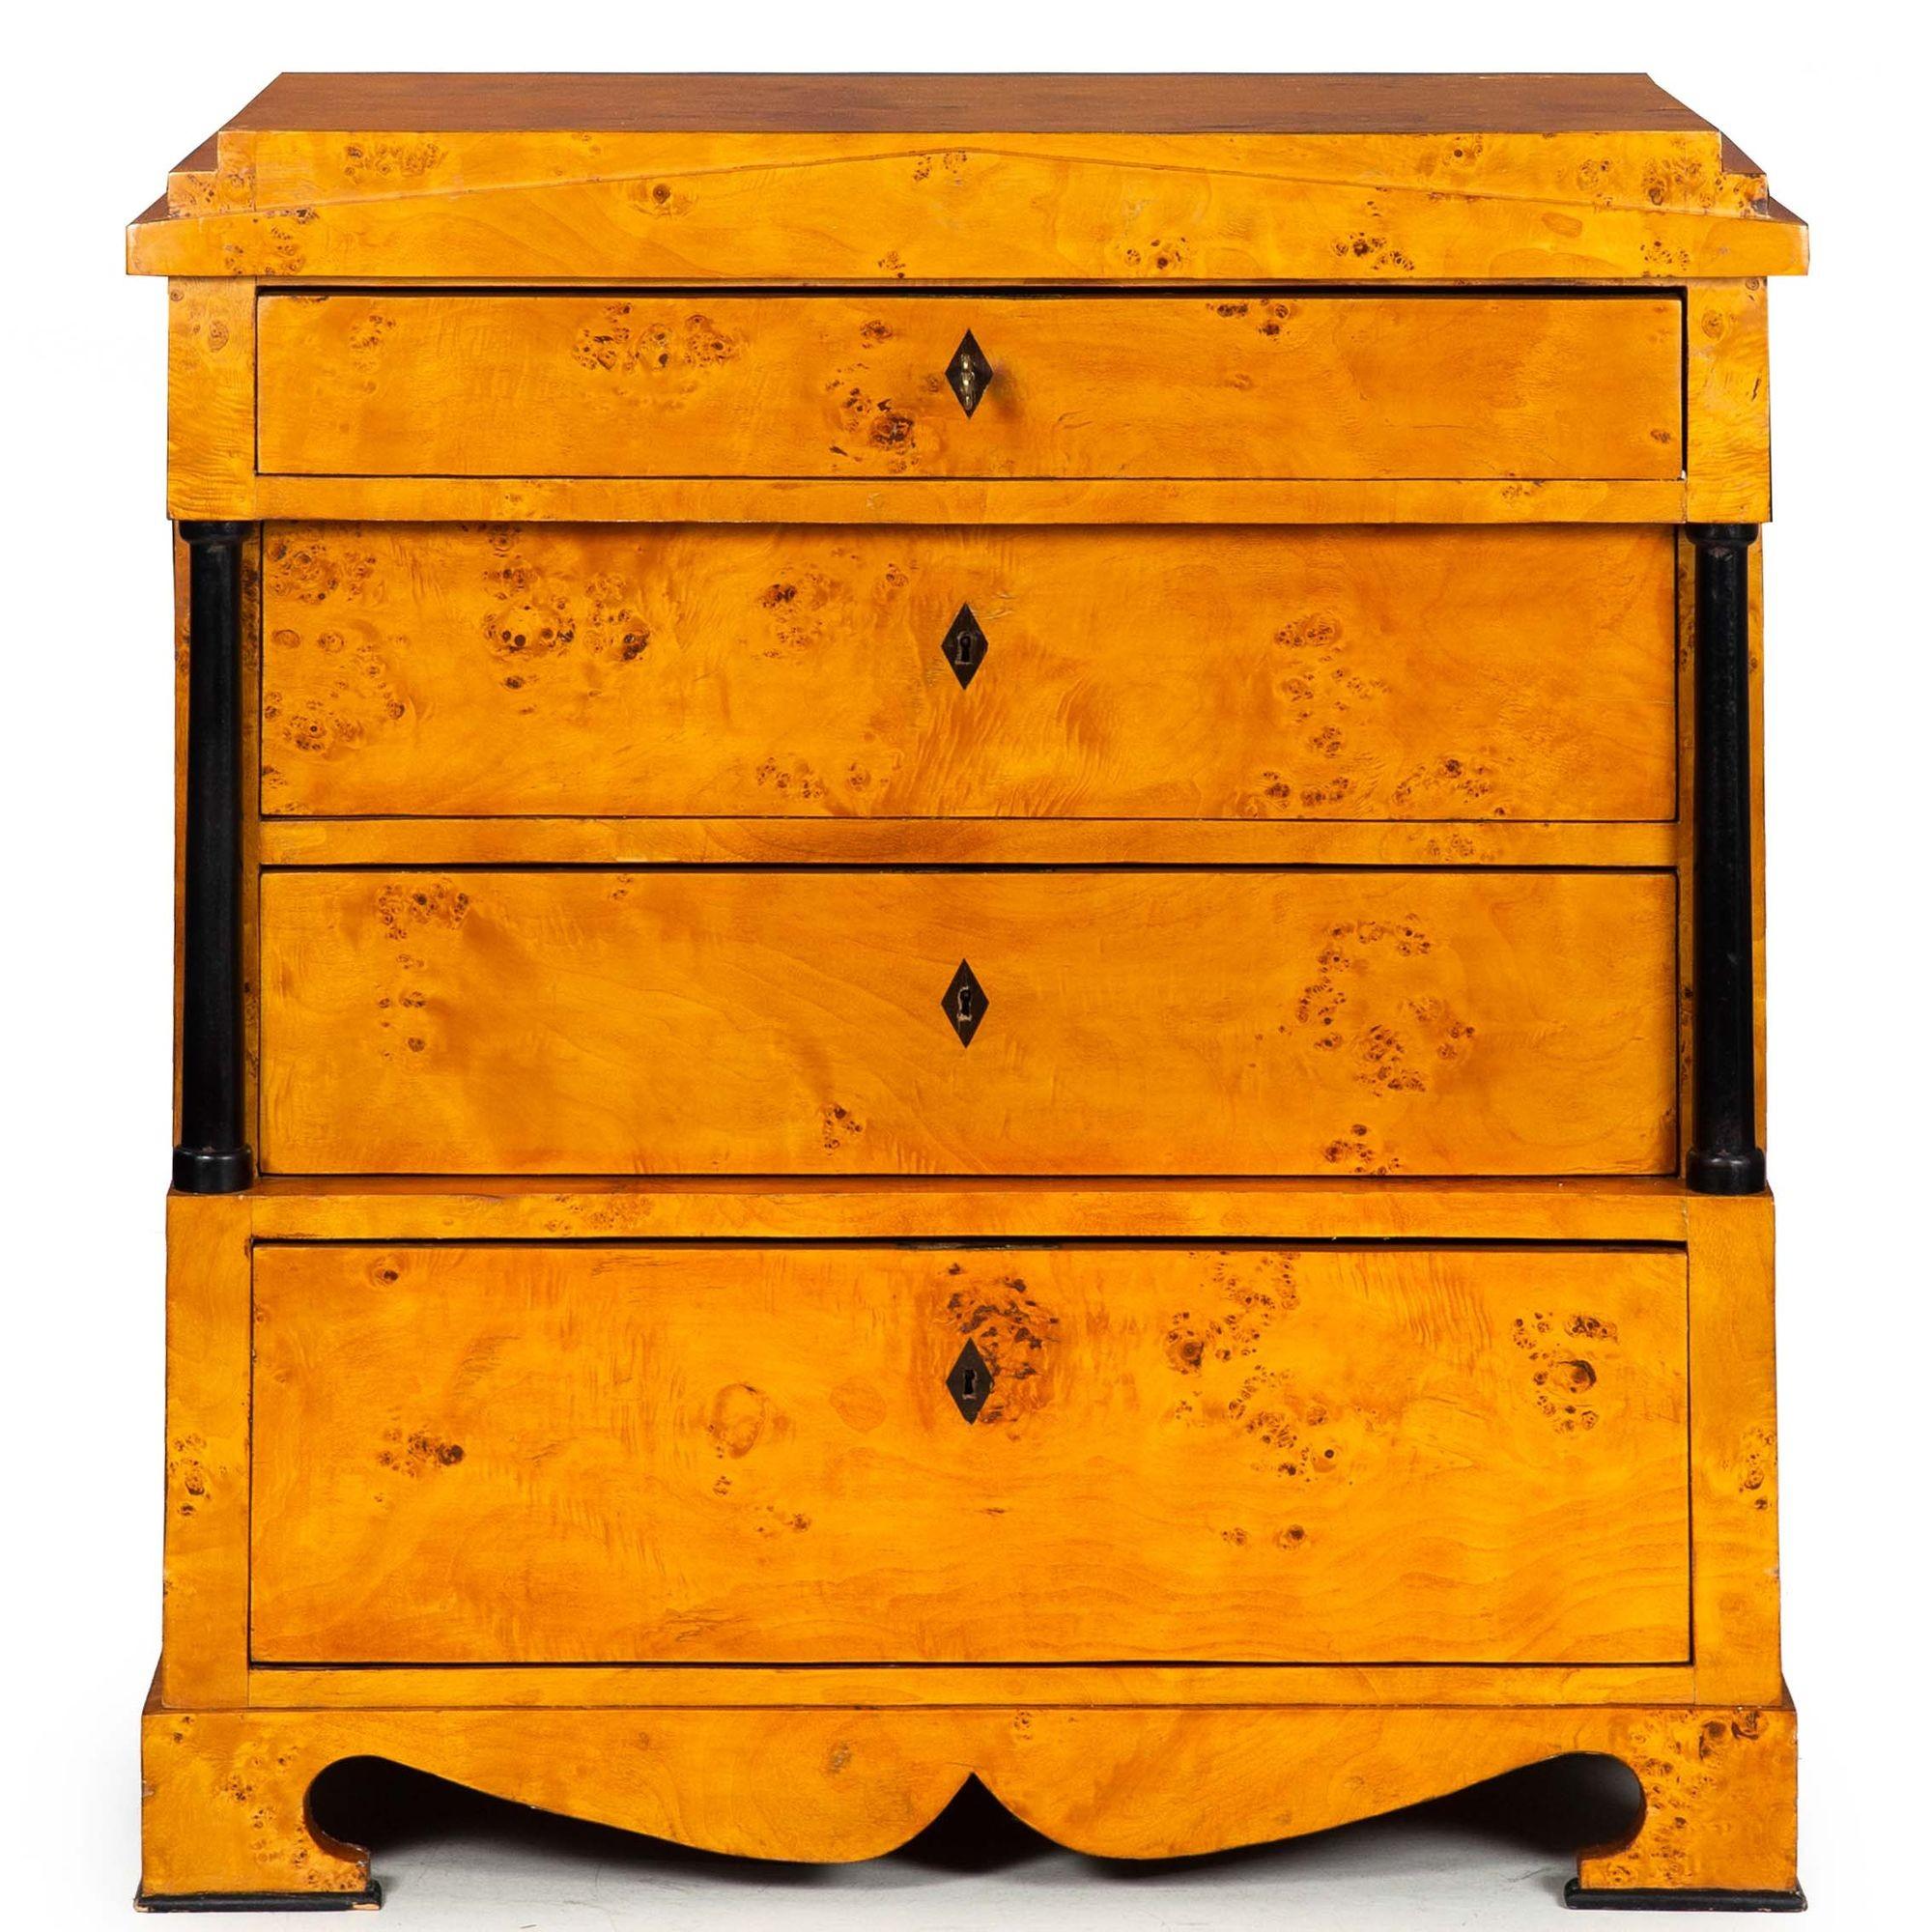 BIEDERMEIER PARCEL-EBONIZED BIRCH ARCHITECTURAL CHEST OF DRAWERS
Cica early-to-mid 19th century
Item # 310EDO04Q

A lovely Biedermeier commode with a powerful architectural form. It features a triangular pediment projecting from the overall